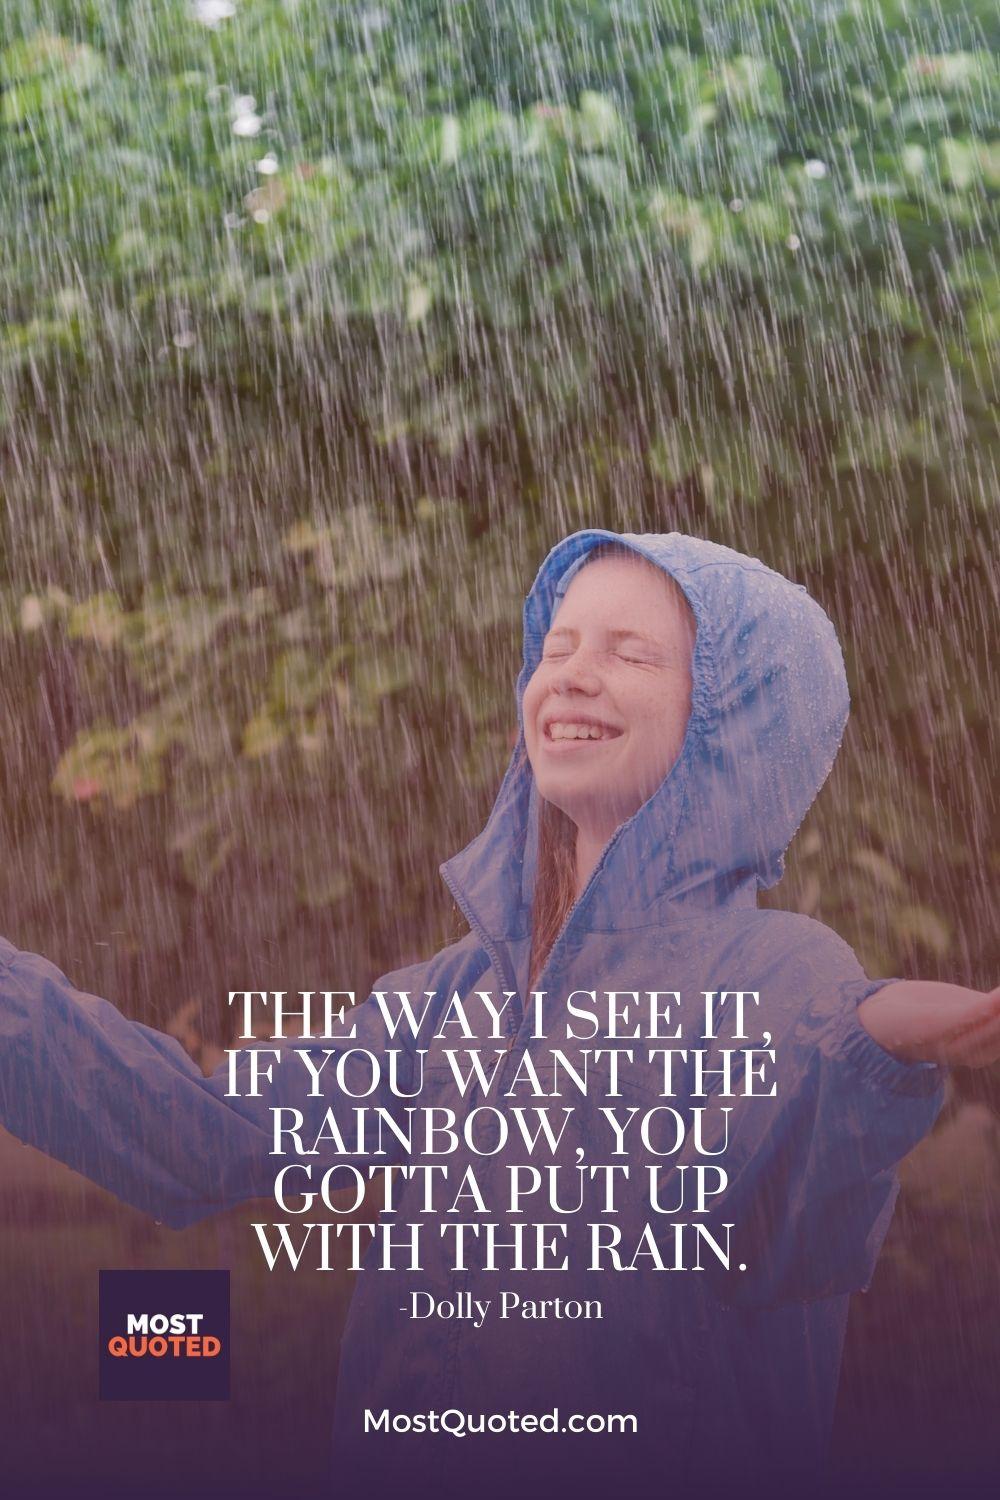 The way I see it, if you want the rainbow, you gotta put up with the rain. - Dolly Parton